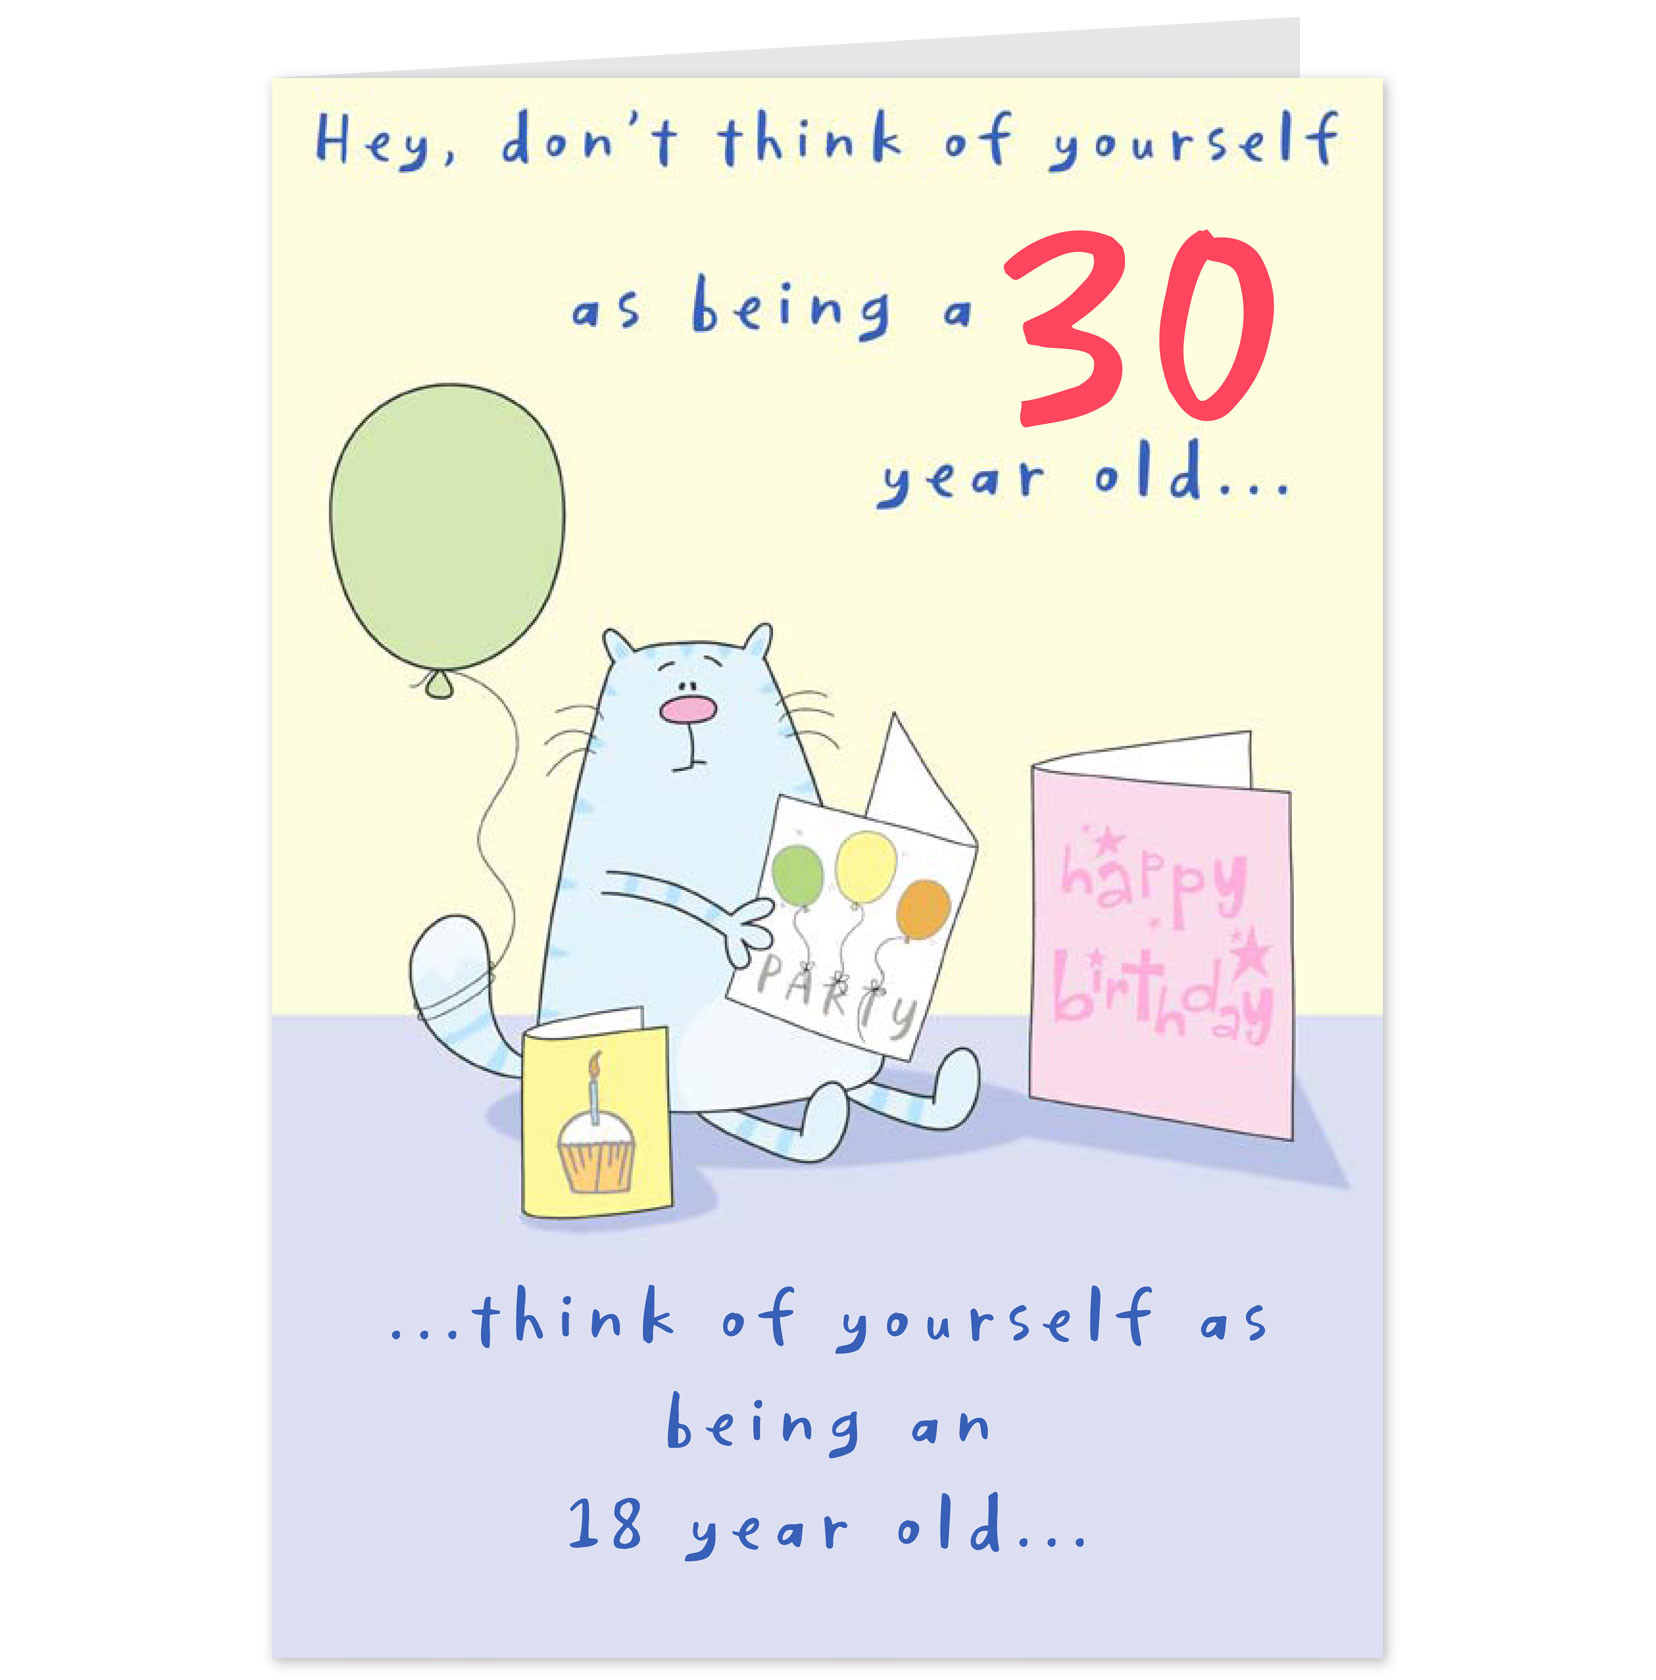 Funny Birthday Quotes For Guys
 Funny 30th Birthday Quotes For Men QuotesGram